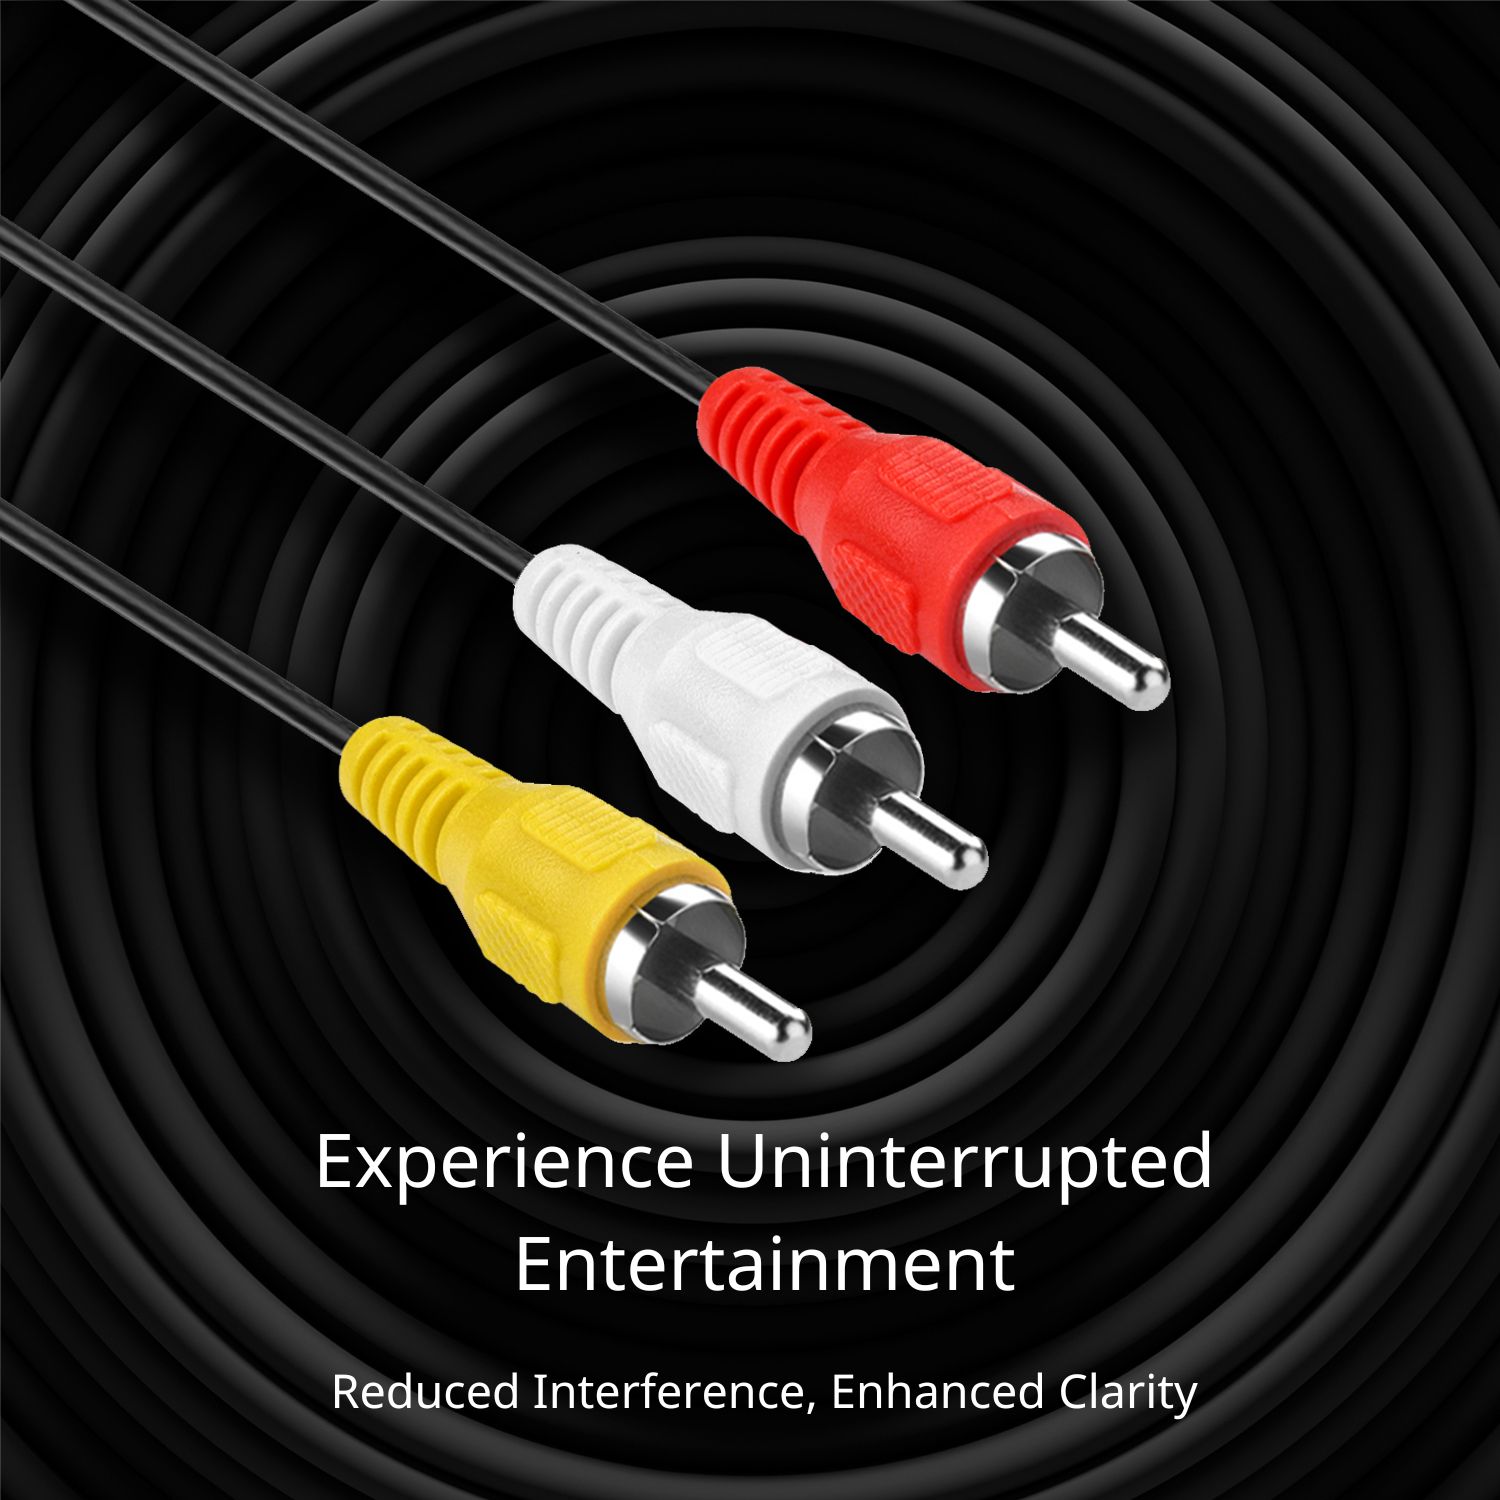 3 RCA Cable (10 FT) - 3RCA AV RCA Composite Video + 2RCA Stereo Audio M/M Male to Male Dual Shielded RCA Connector Plug Jack Wire Cord - image 4 of 6